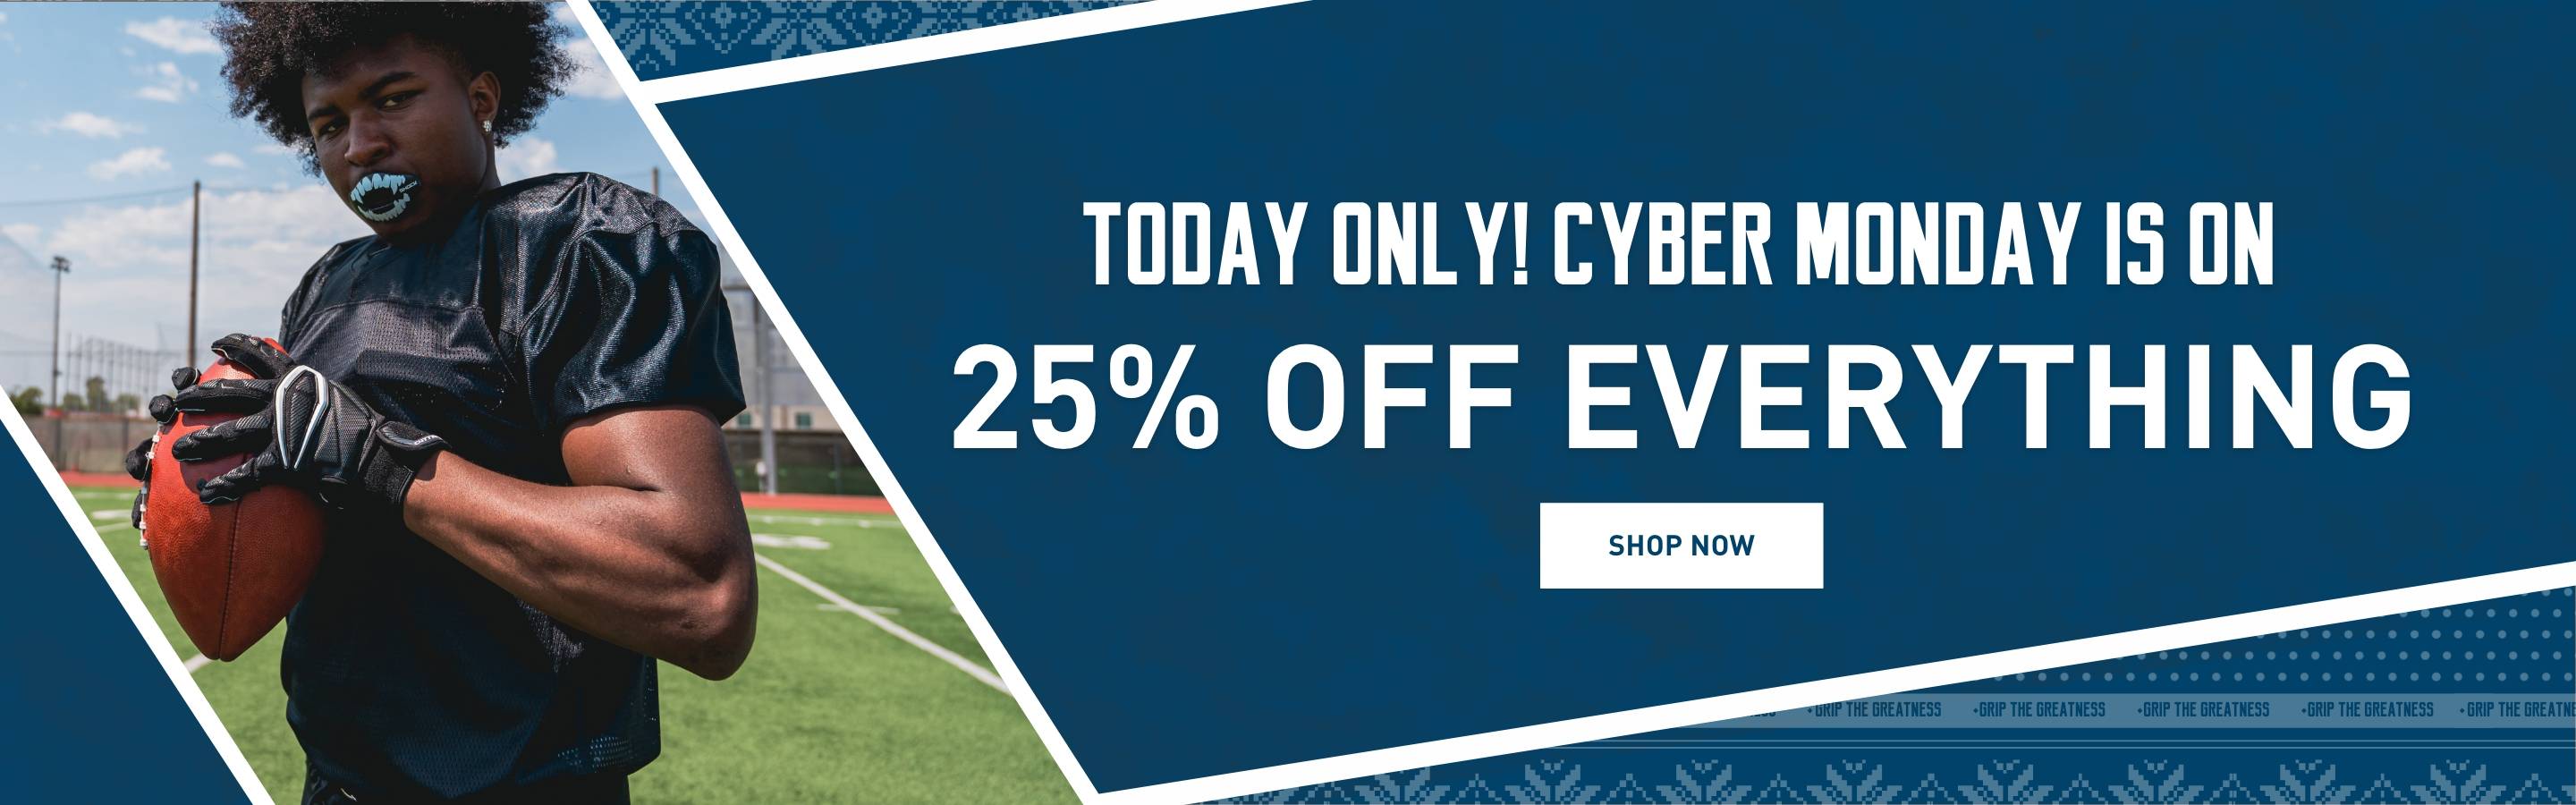 Today Only! Cyber Monday is On. 25% Off Everything Shop Now